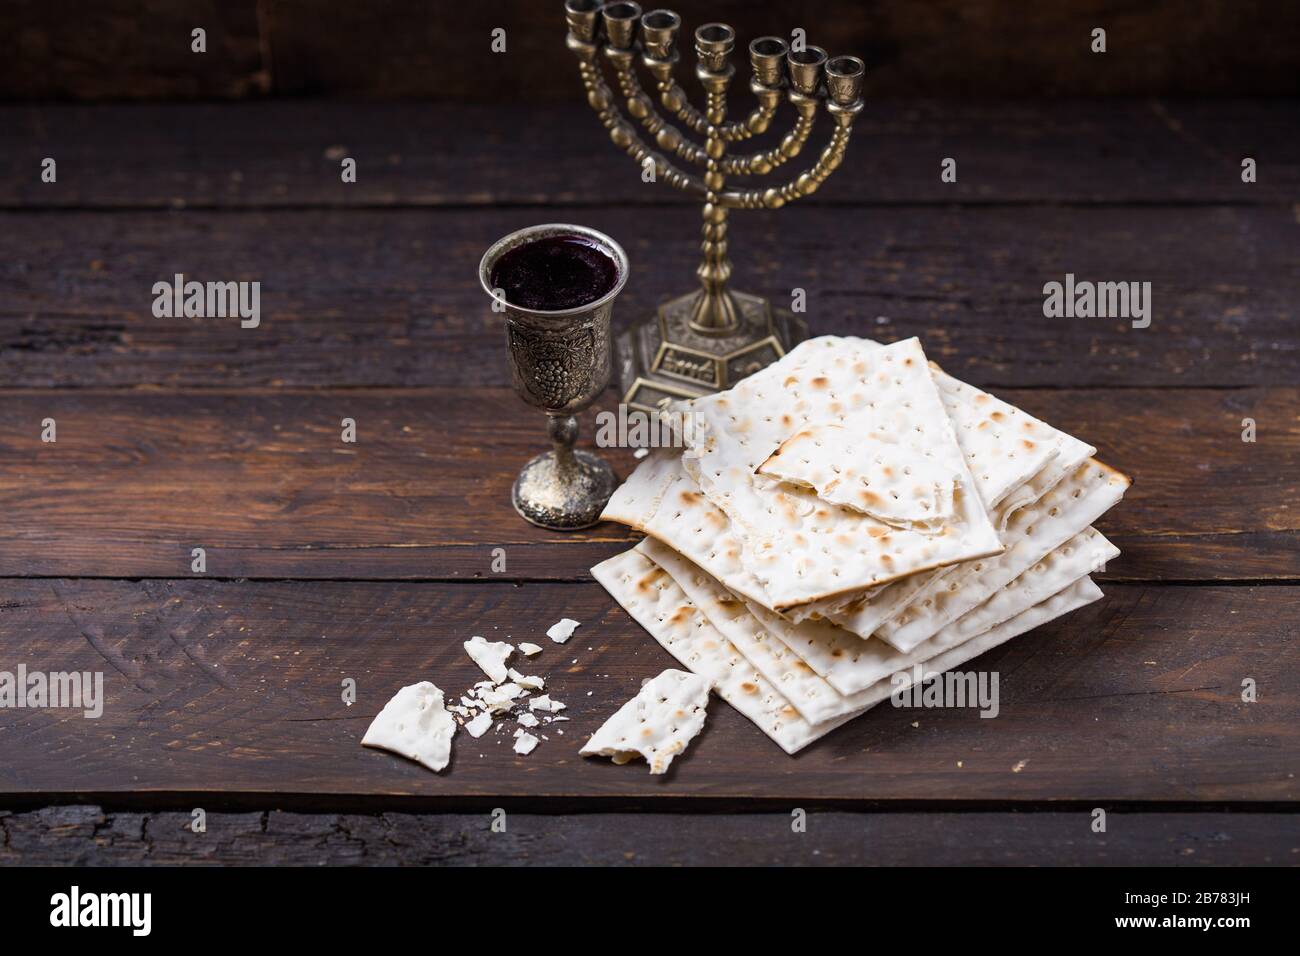 Red kosher wine with a white  matzah or matza on a vintage wood background presented as a Passover seder meal with copy space. Stock Photo